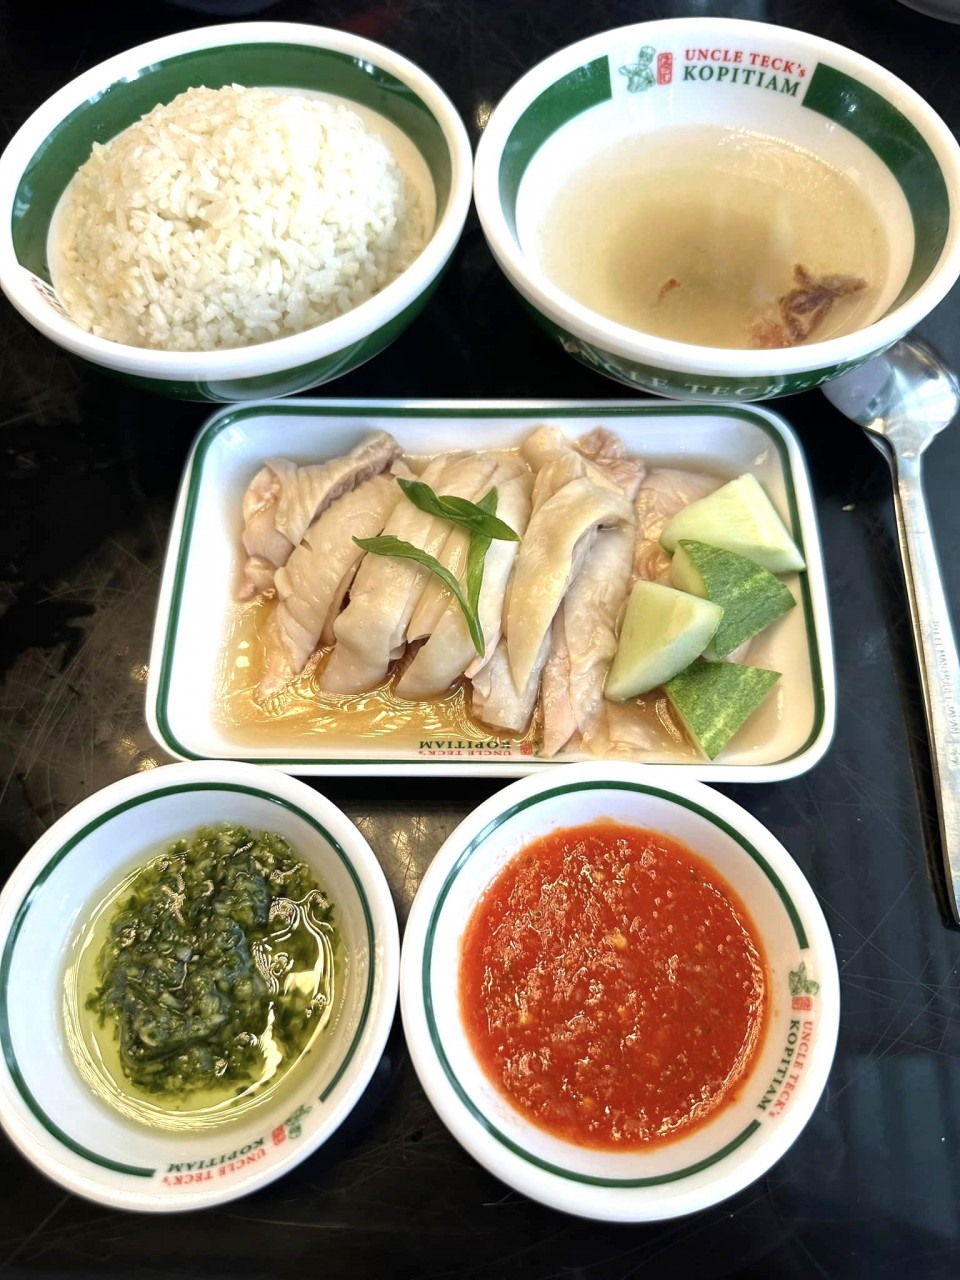 Uncle Teck's Hakka chicken rice seemed very much like the Cantonese and Hainanese chicken rice fare generally. It was difficult to pinpoint what ingredient in it staked its claim to its Hakka-ness. Perhaps, it was the special green dipping sauce that gave a zing to the tender boneless chicken when eaten with rice. – Marilyn Madrod pic